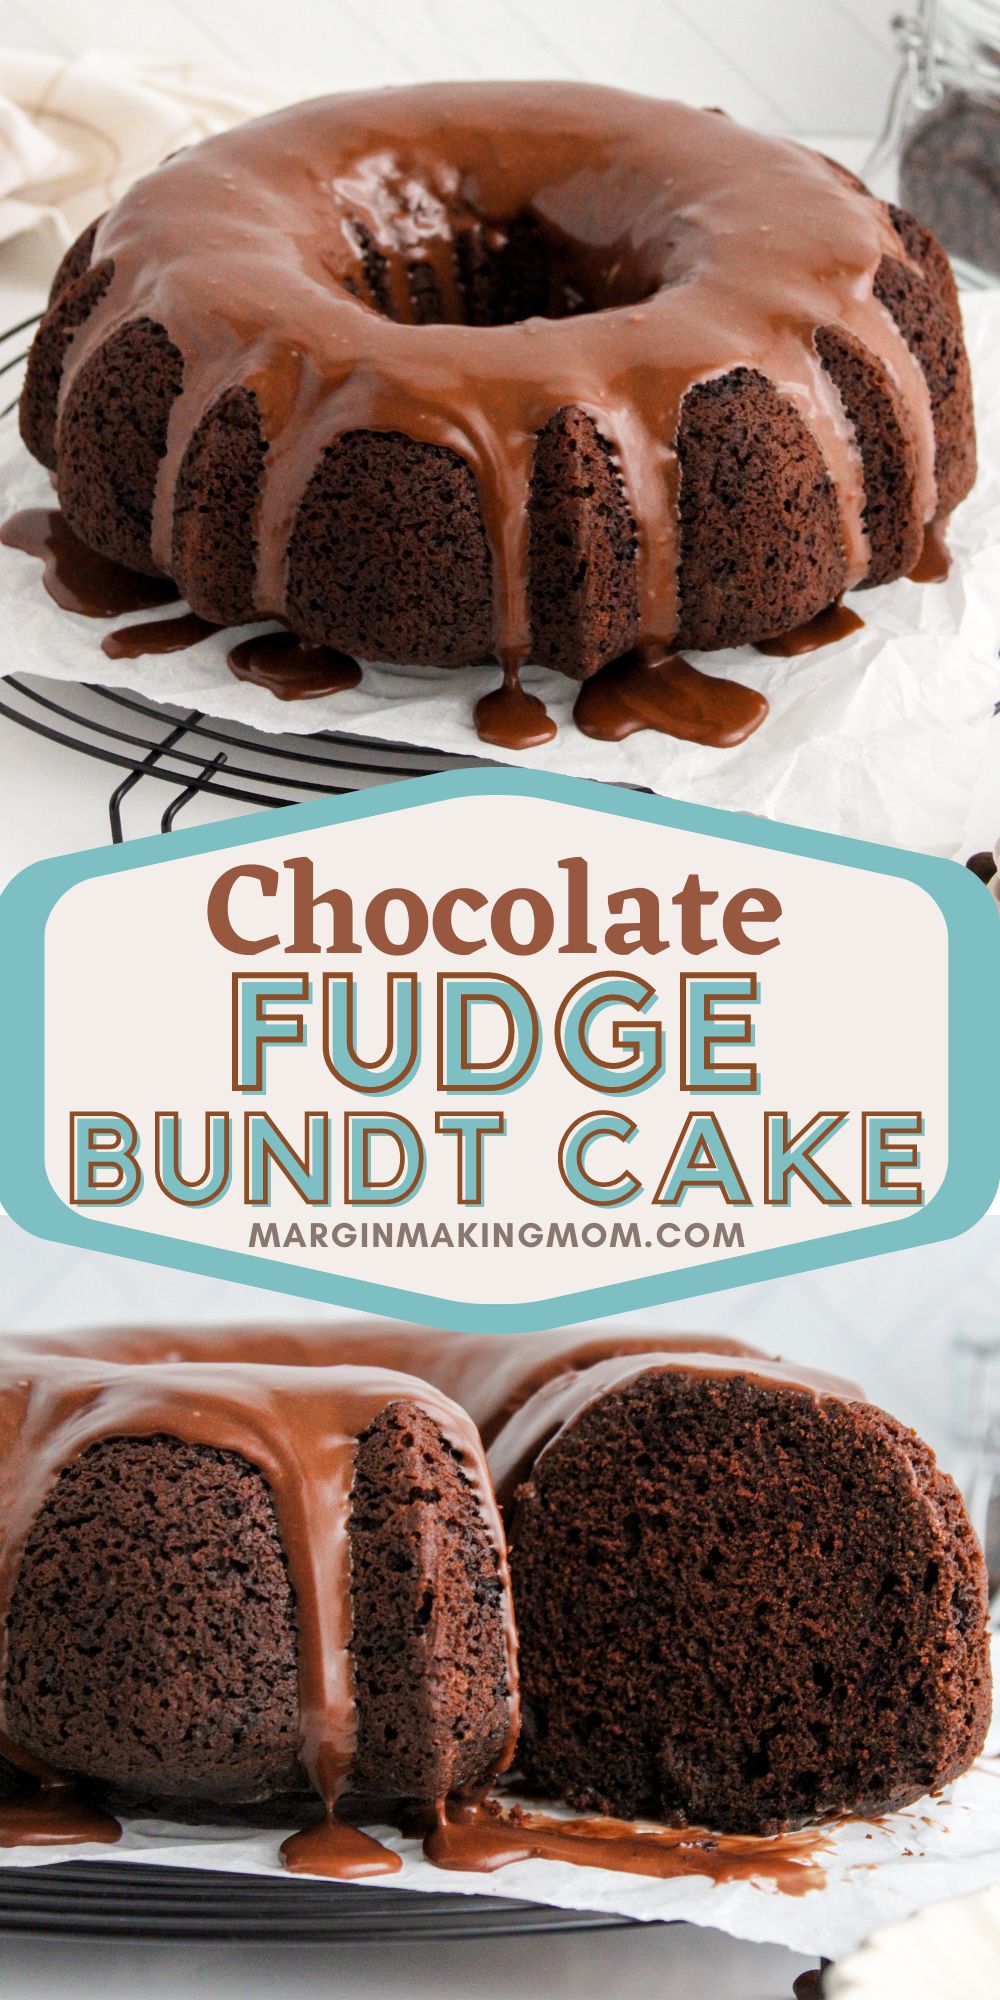 two photos; one shows a chocolate fudge bundt cake with chocolate icing; the other shows a slice cut out from the cake